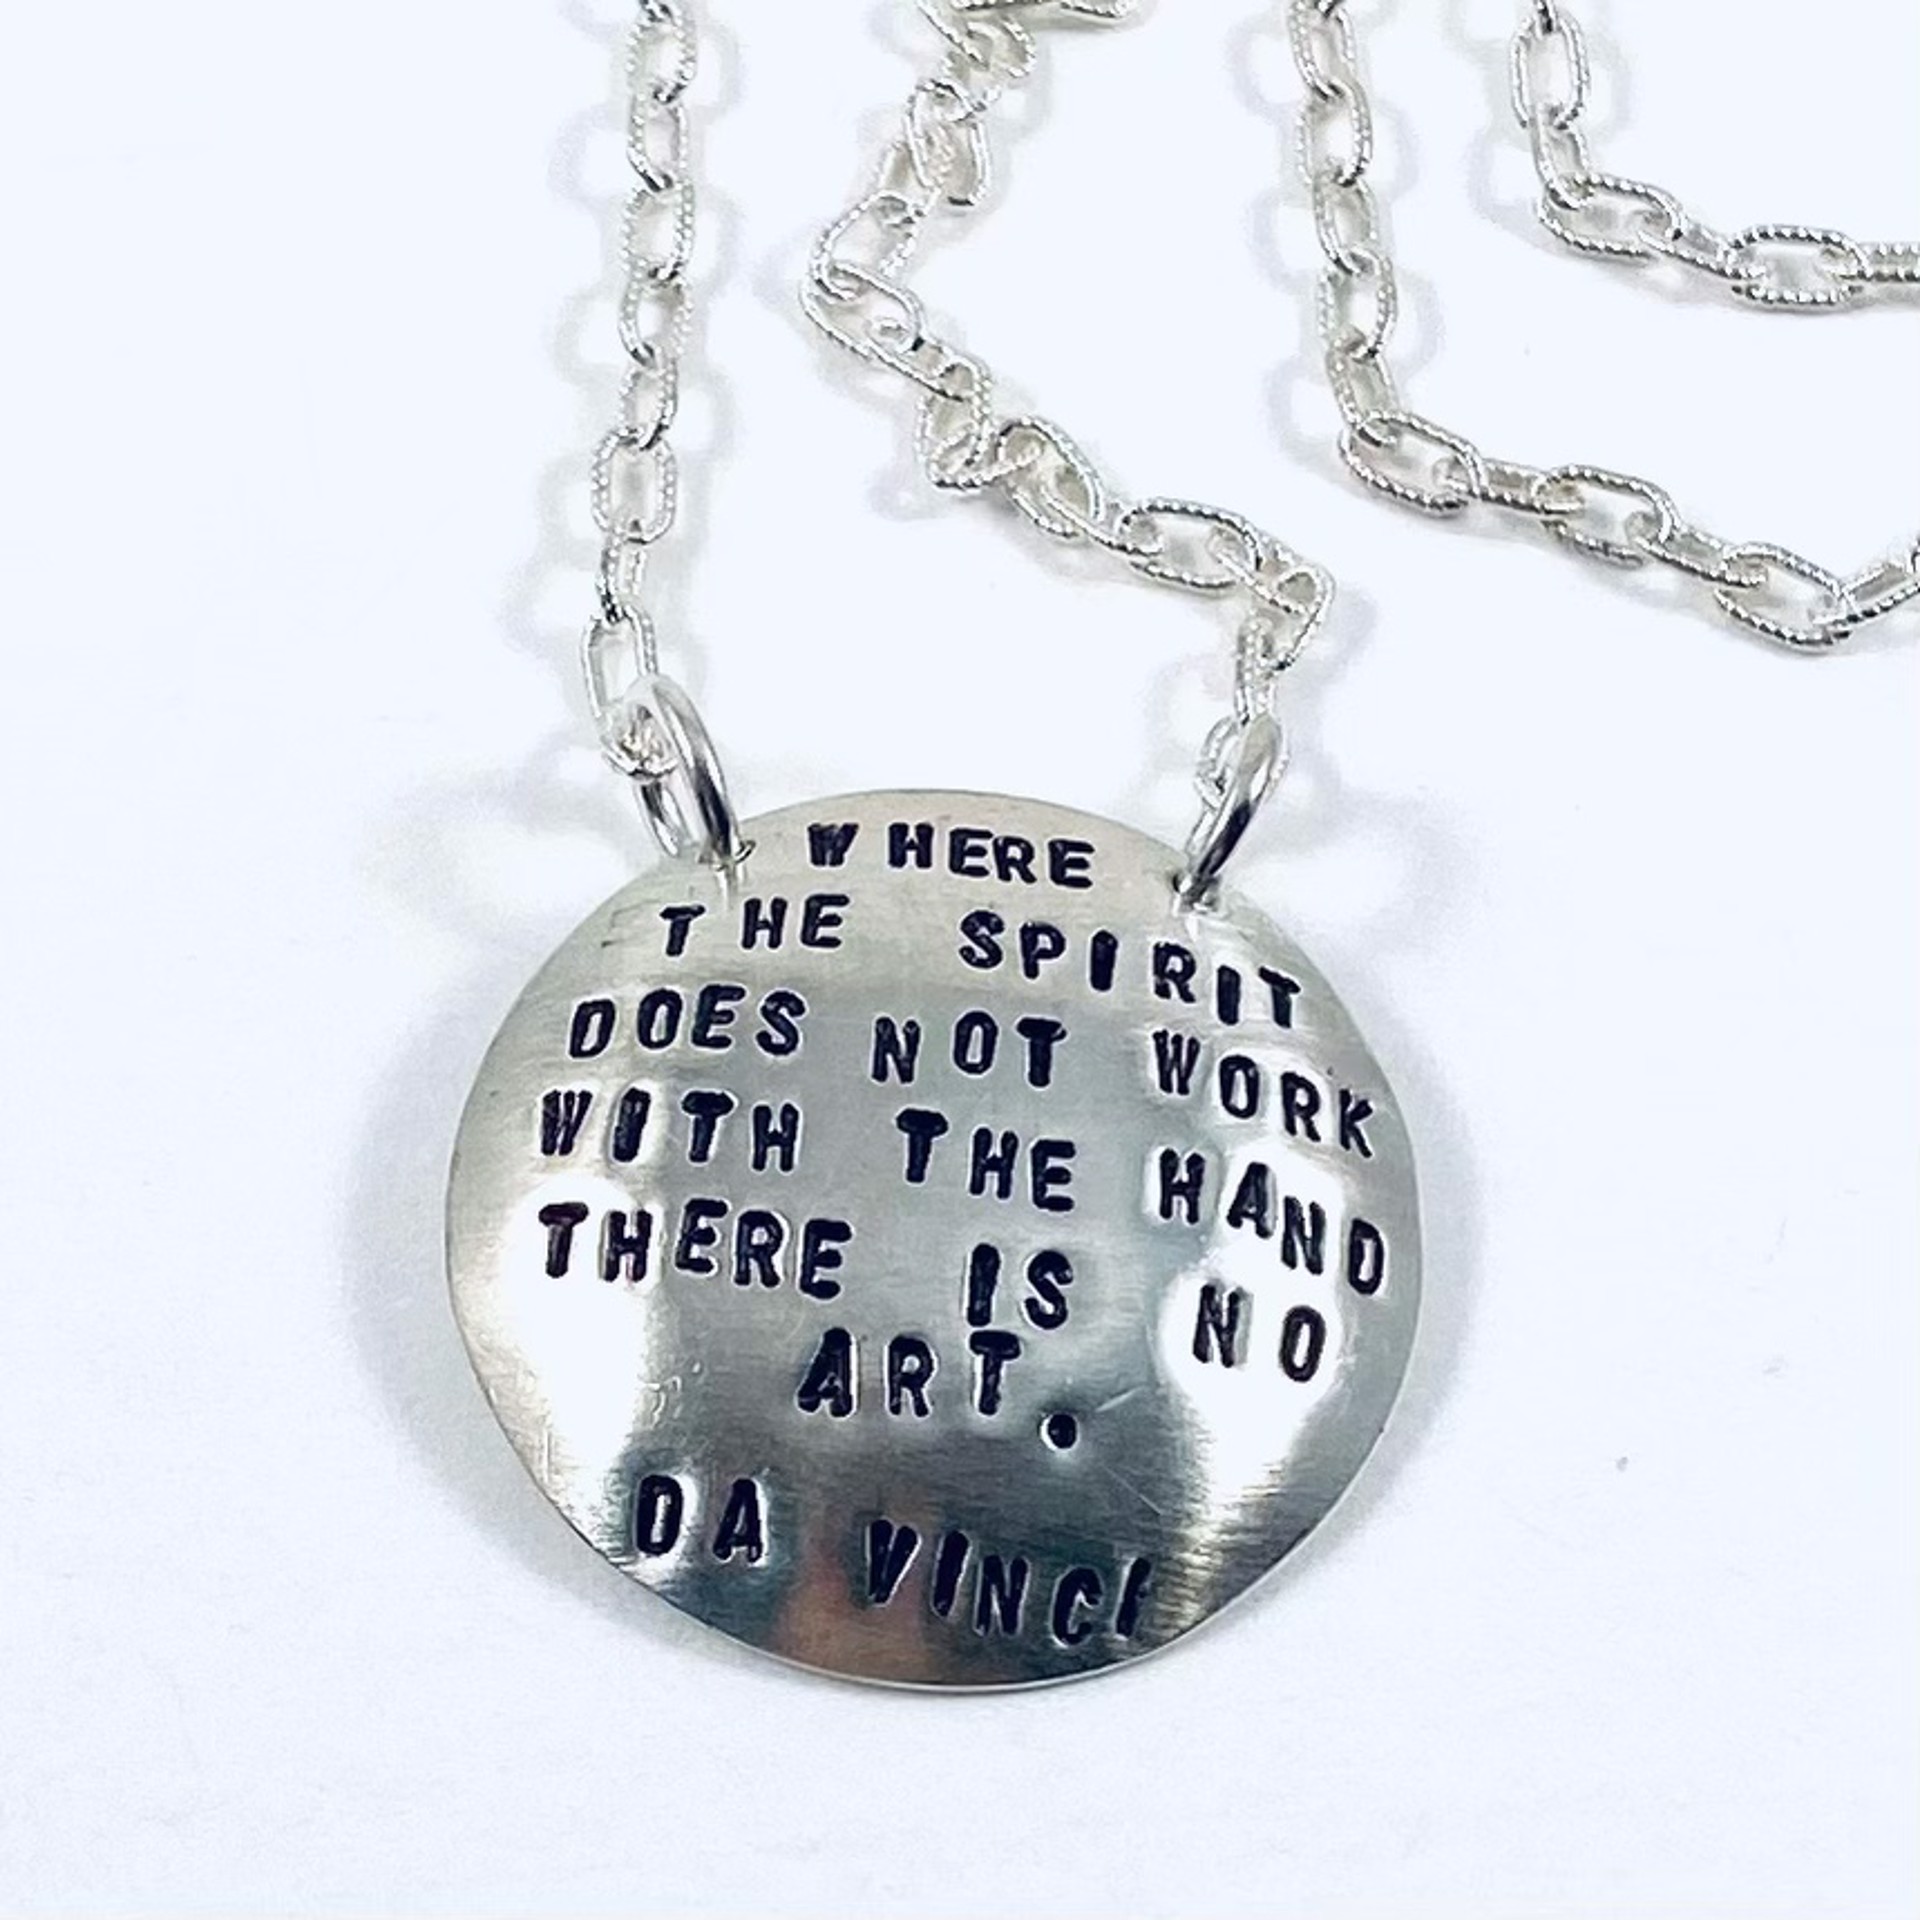 "Where The Spirit Does Not Work With The Hand...." Necklace by Shelby Lee - jewelry